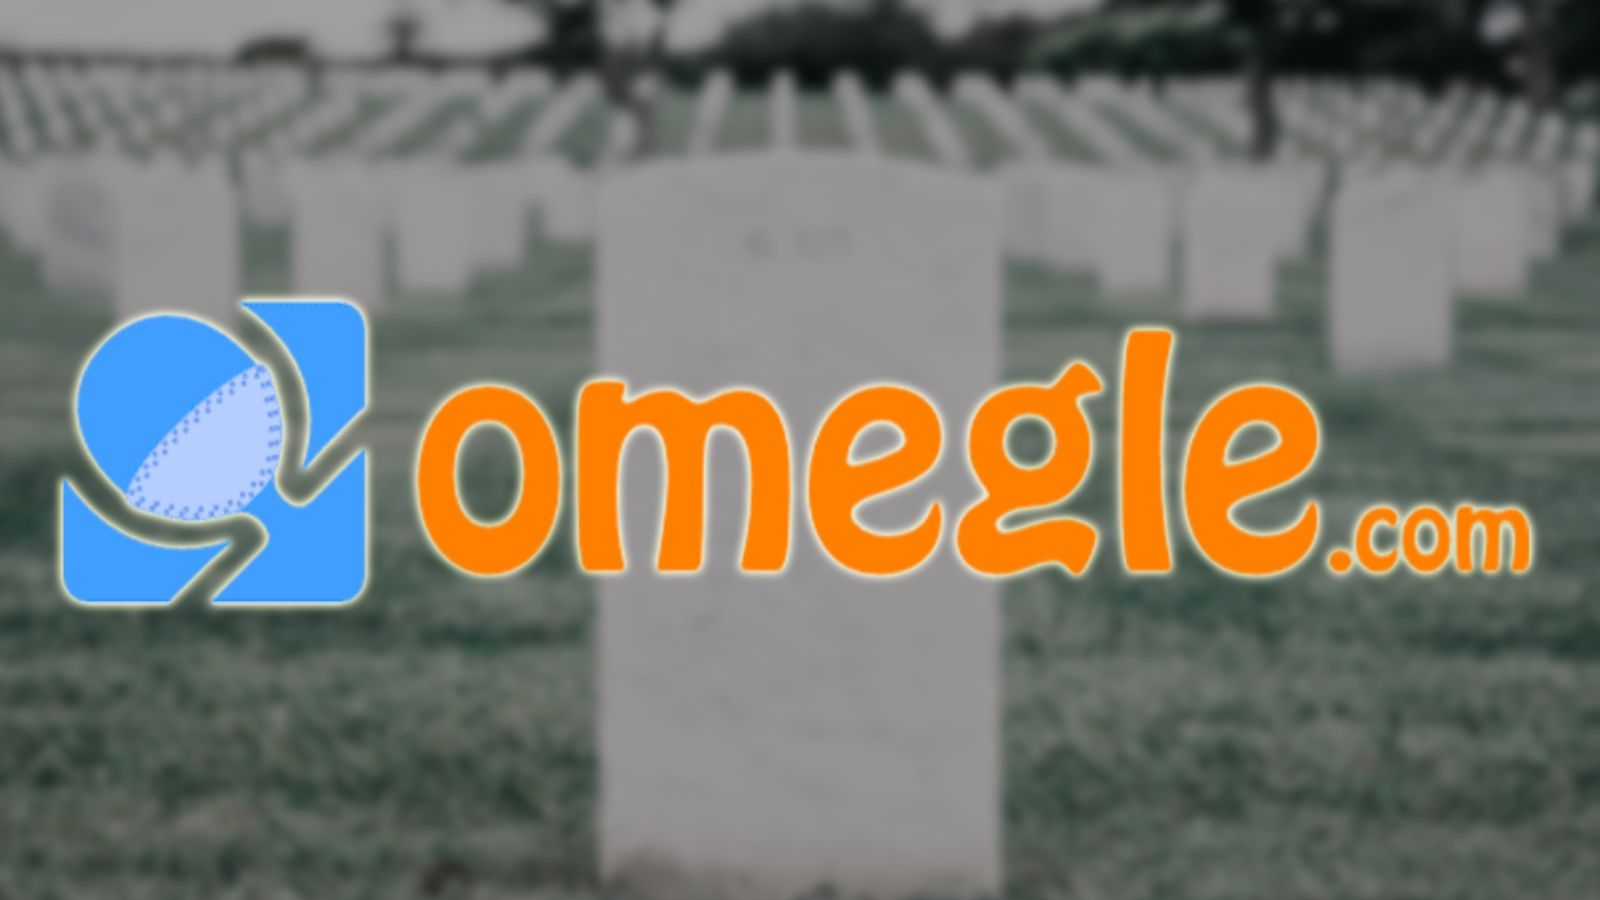 The Omegle logo on a grave stone to signify the death of the online random chat website